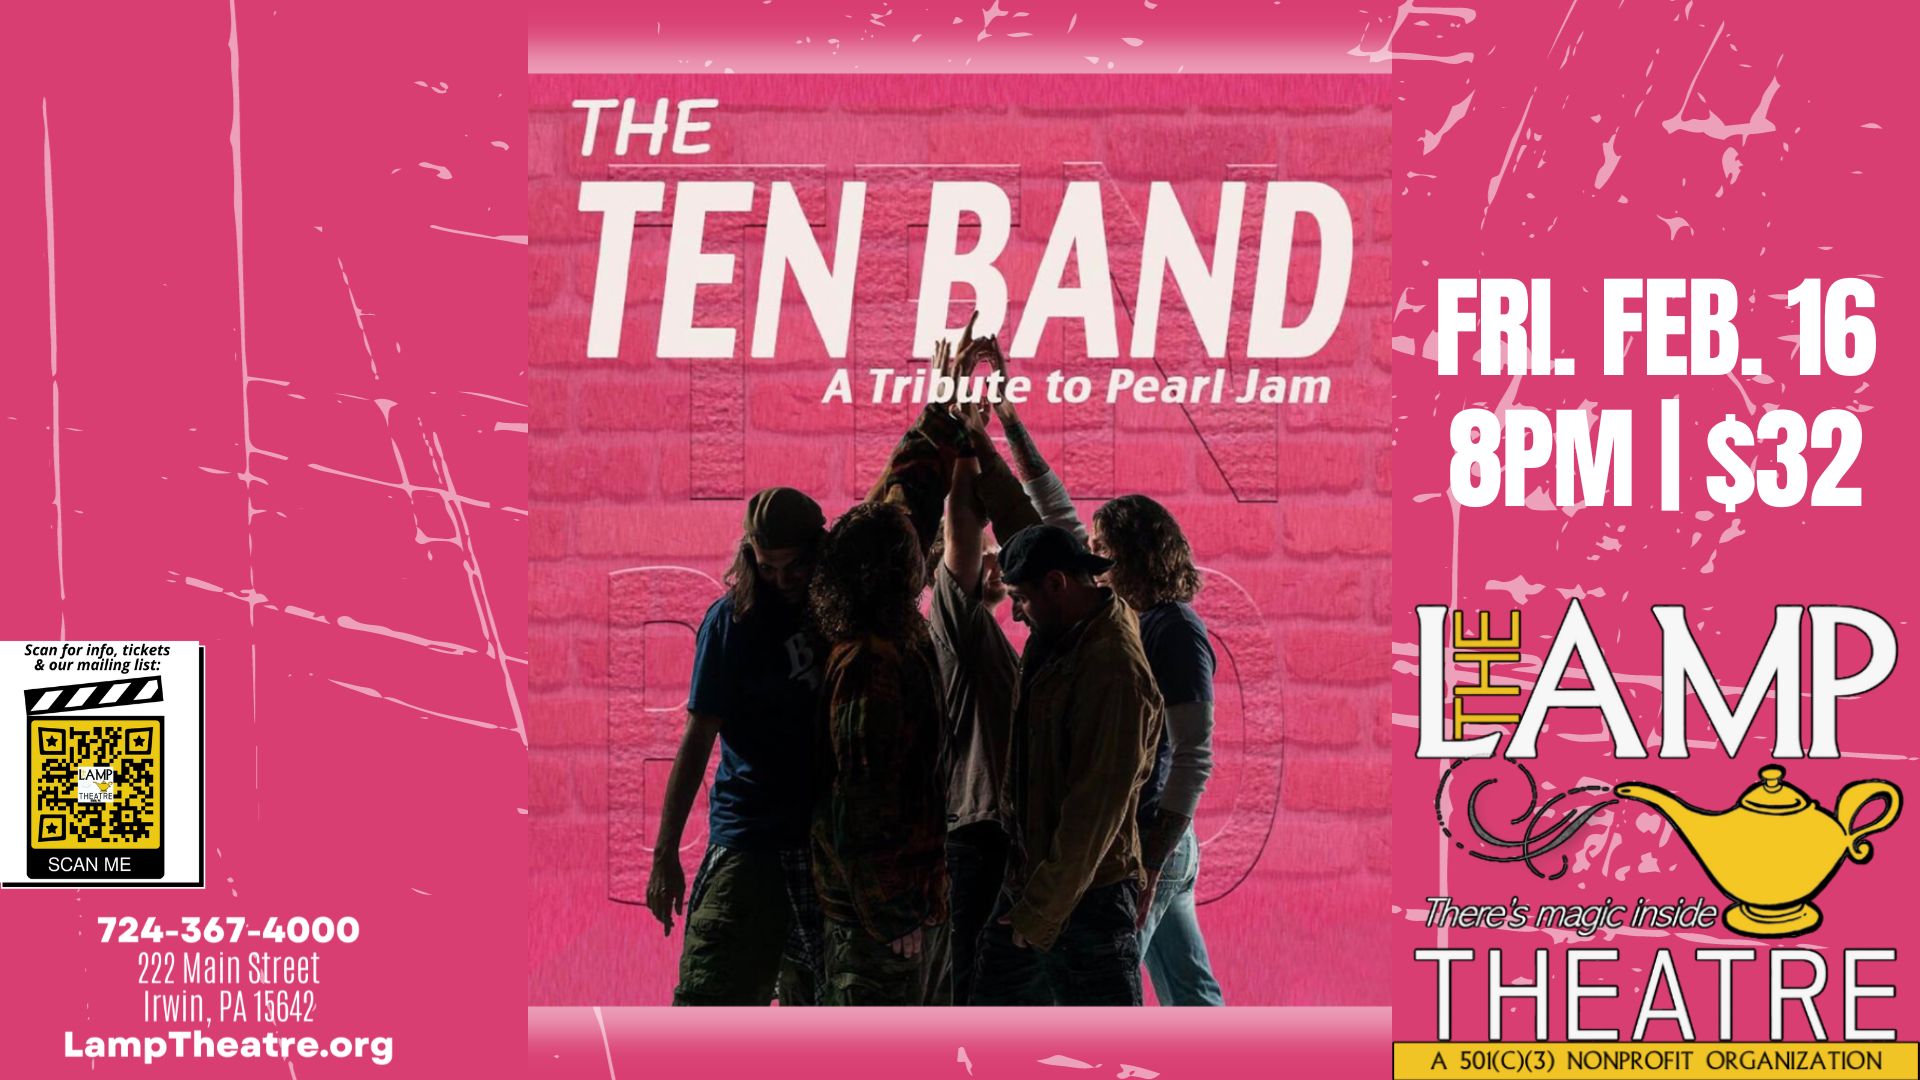 The Ten Band - A Tribute to Pearl Jam, Irwin, Pennsylvania, United States